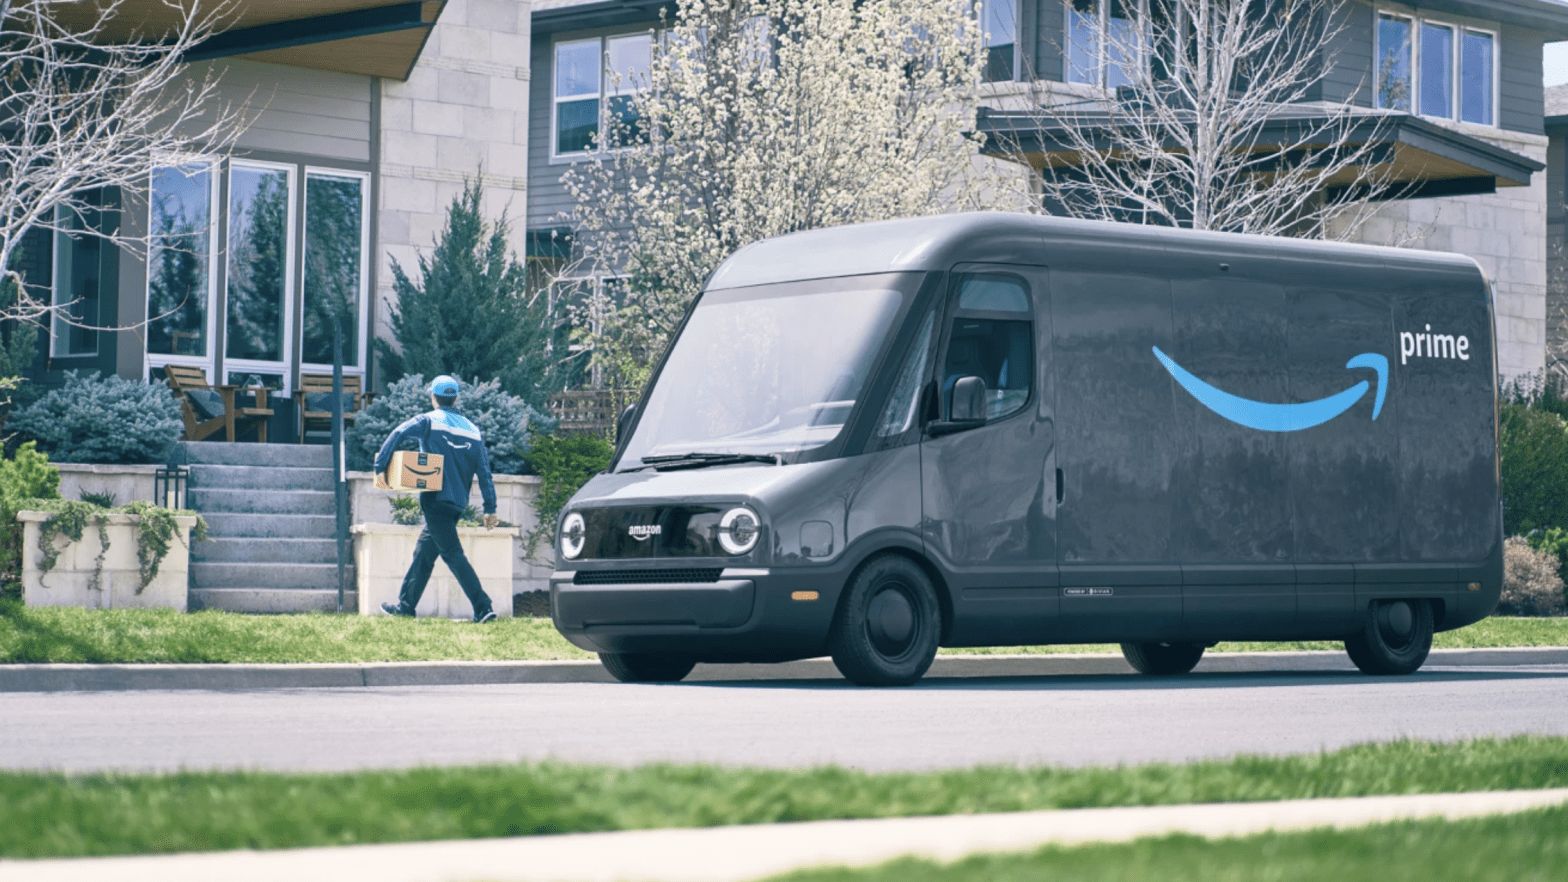 Amazon claims to have made 5 million deliveries using Rivian electric vehicles since July.  (Image: Amazon)